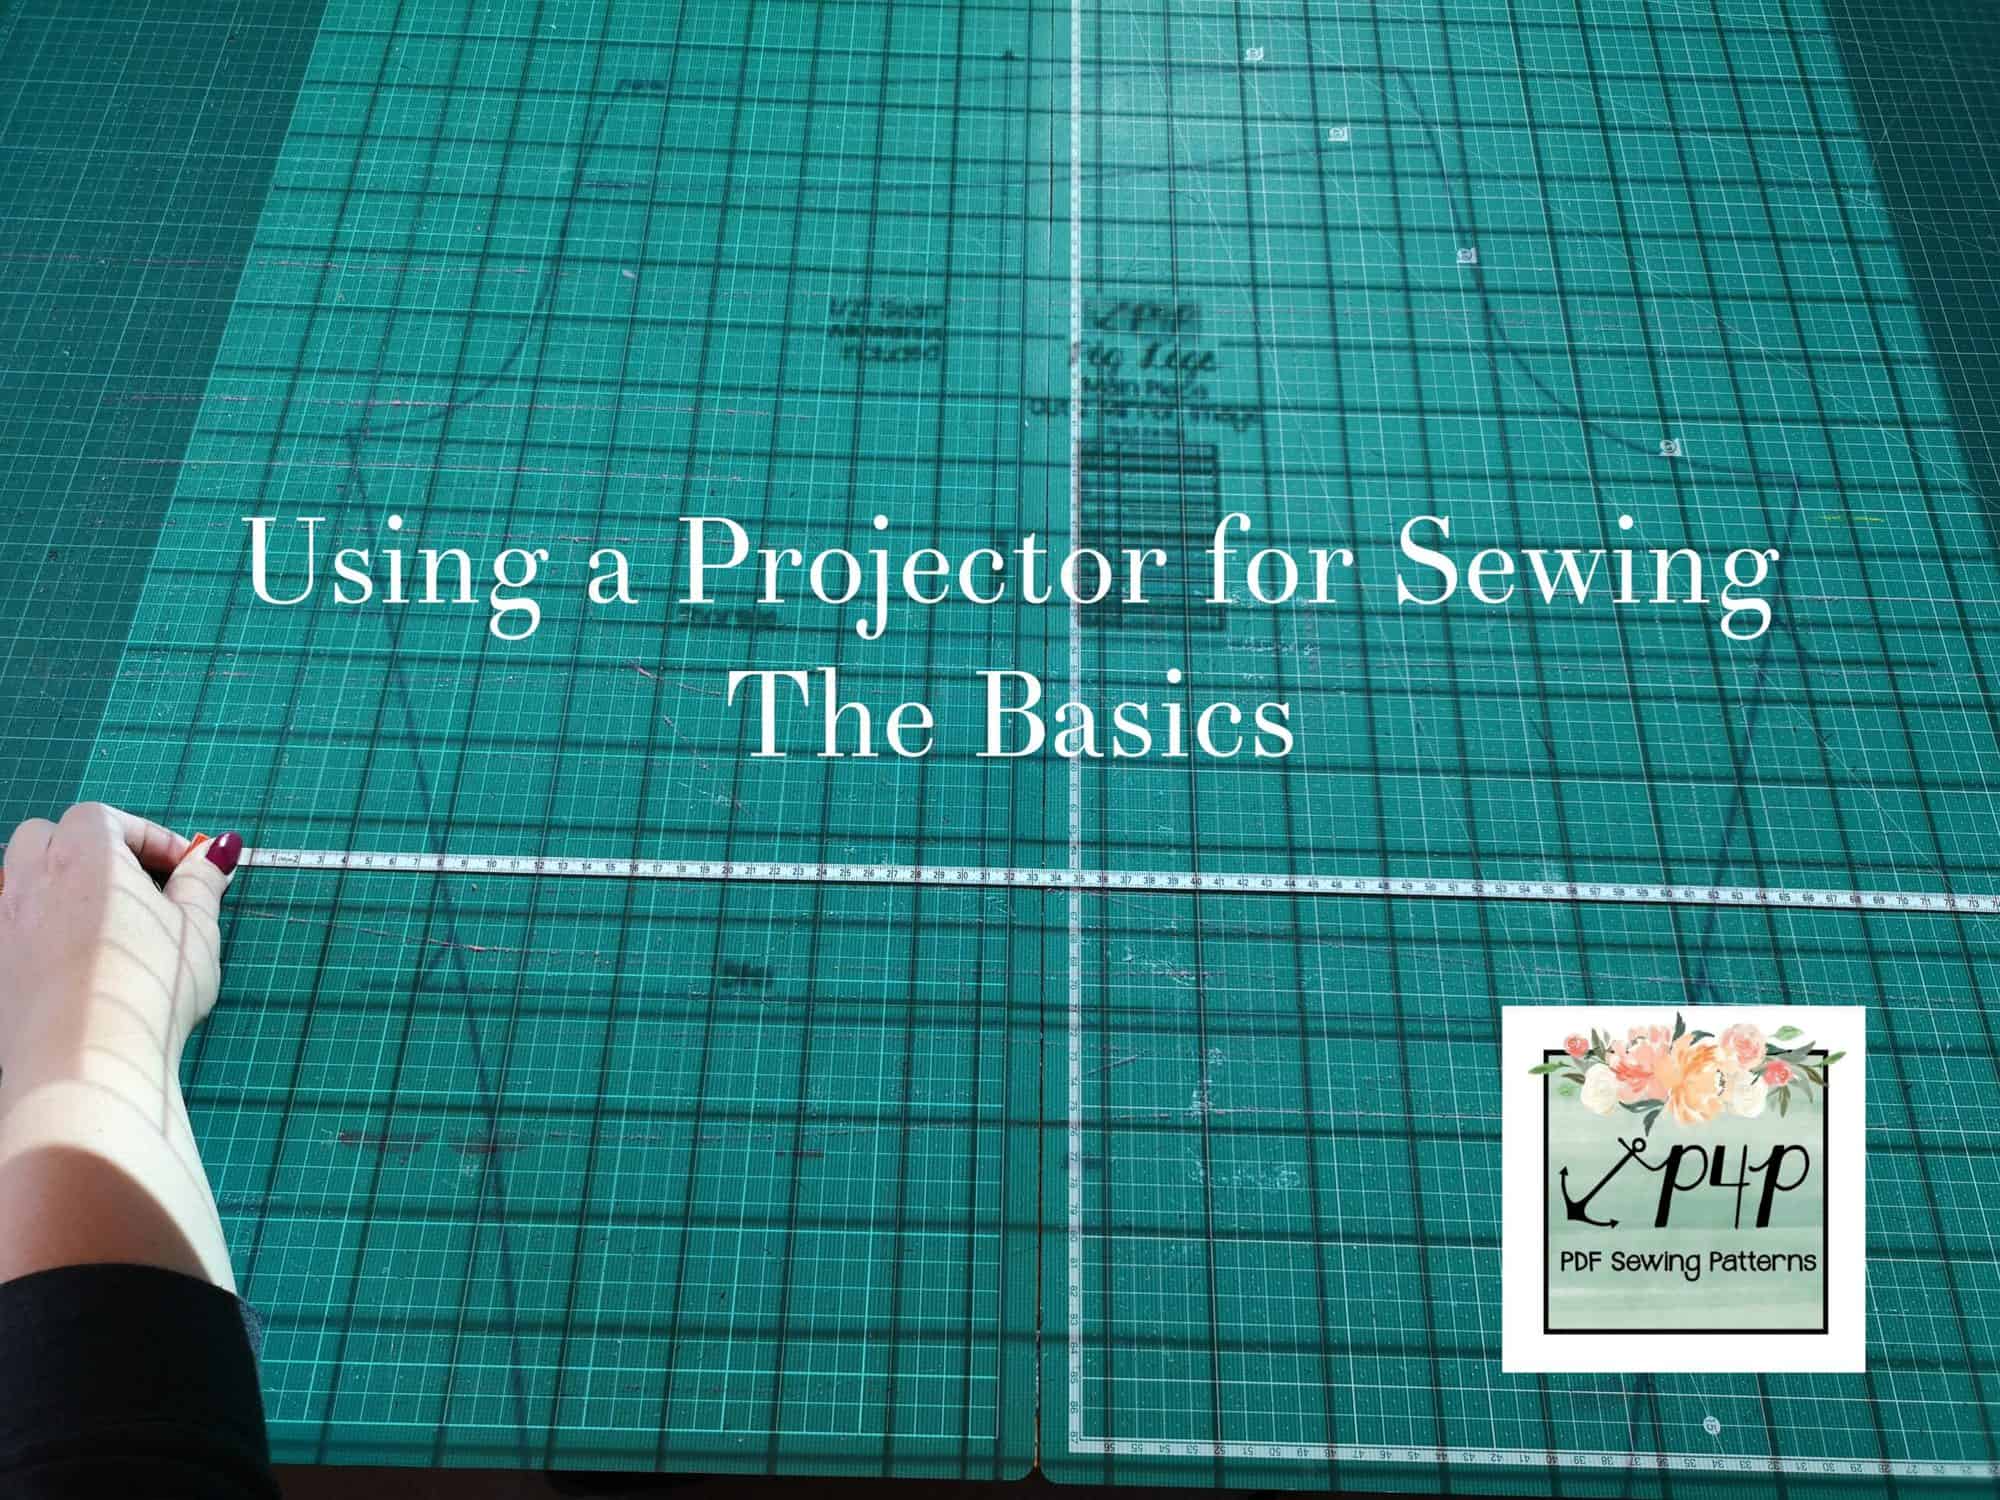 Projector for Sewing Patterns